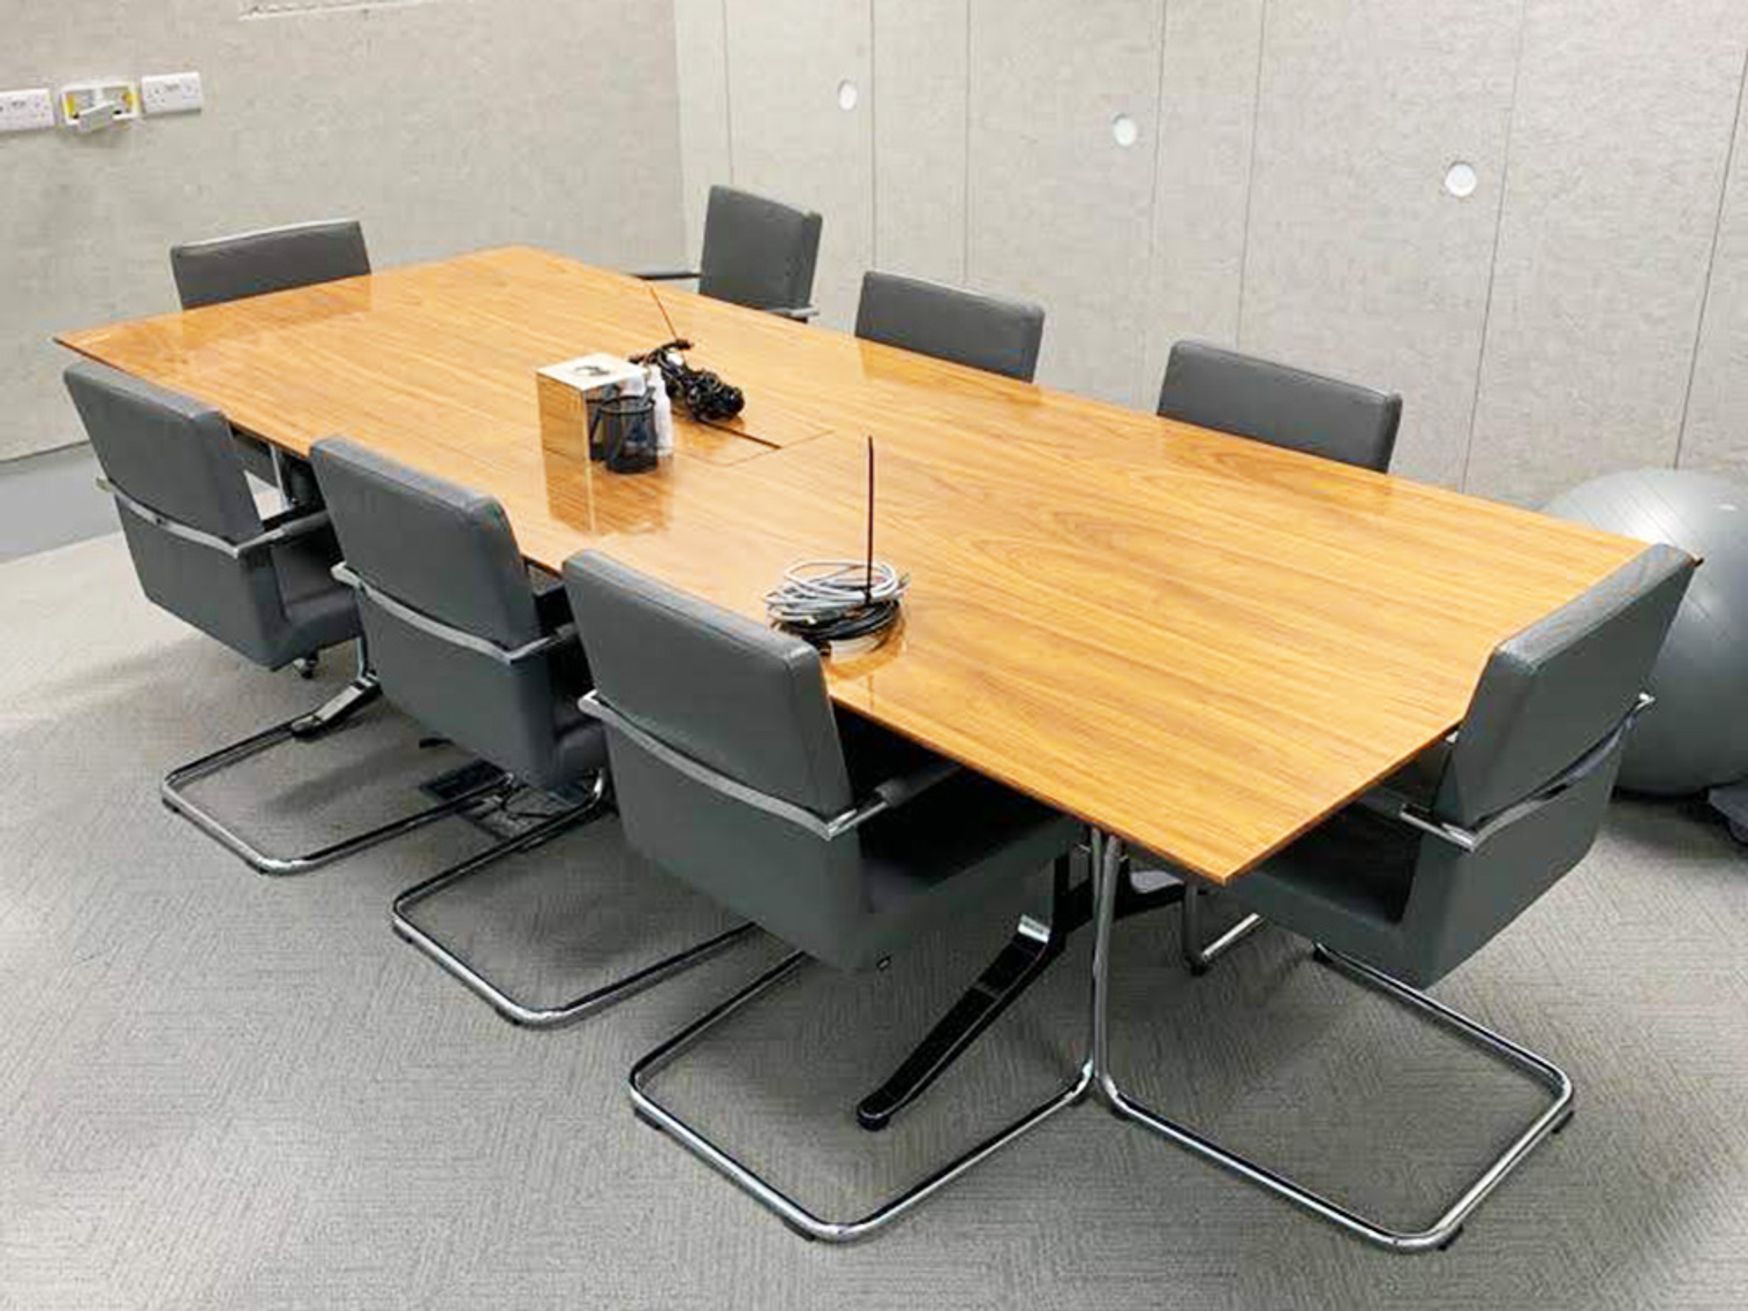 Used 2800mm Boardroom Table with Cable Management - small chip